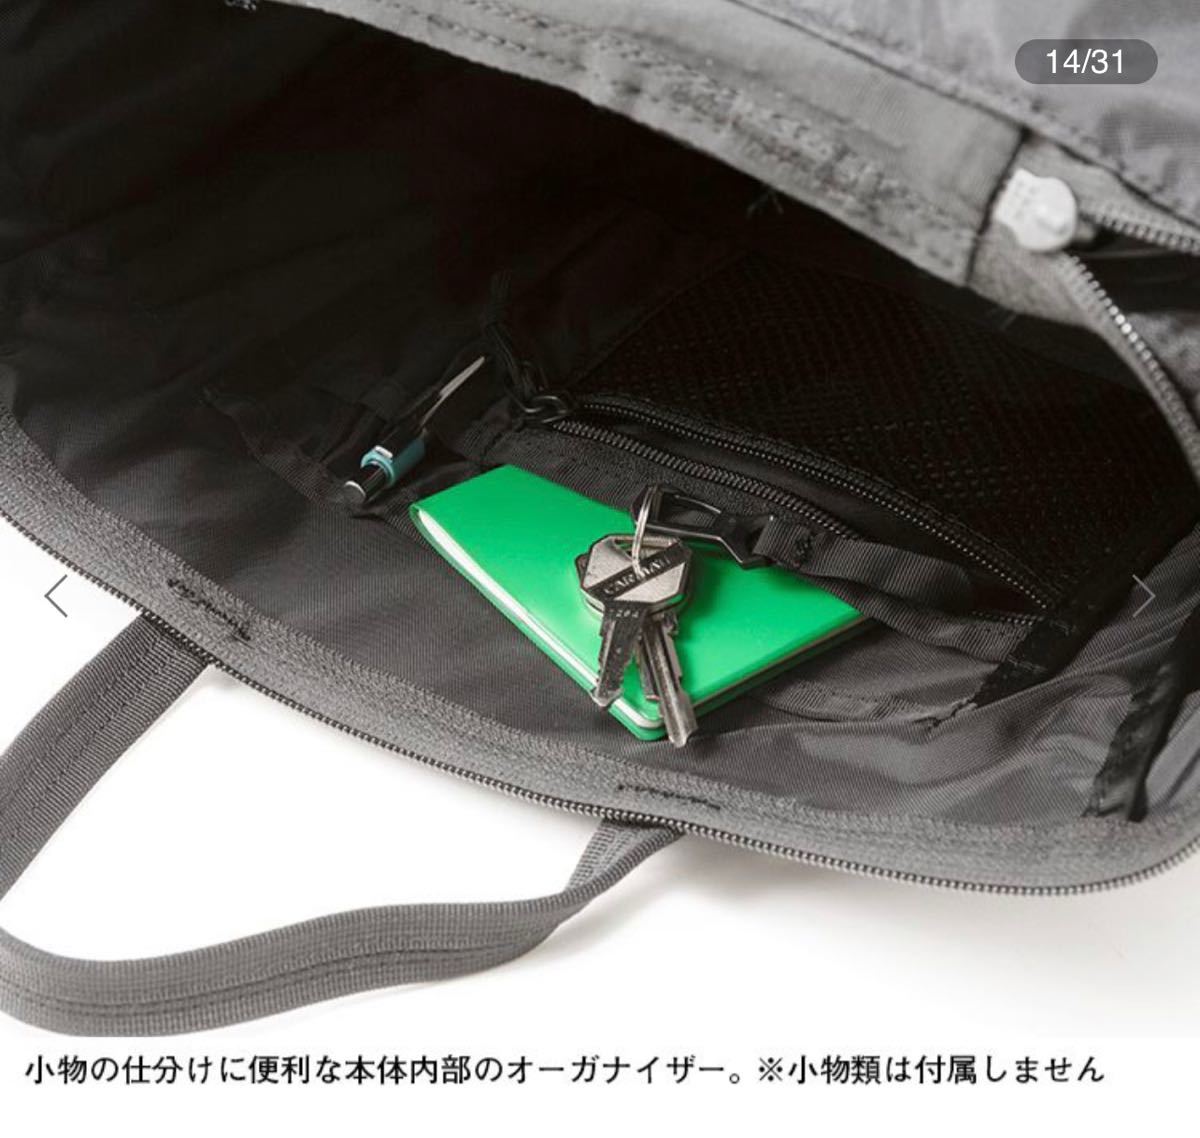 【PayPay最安】【新品】THE NORTH FACE BCヒューズボックストート